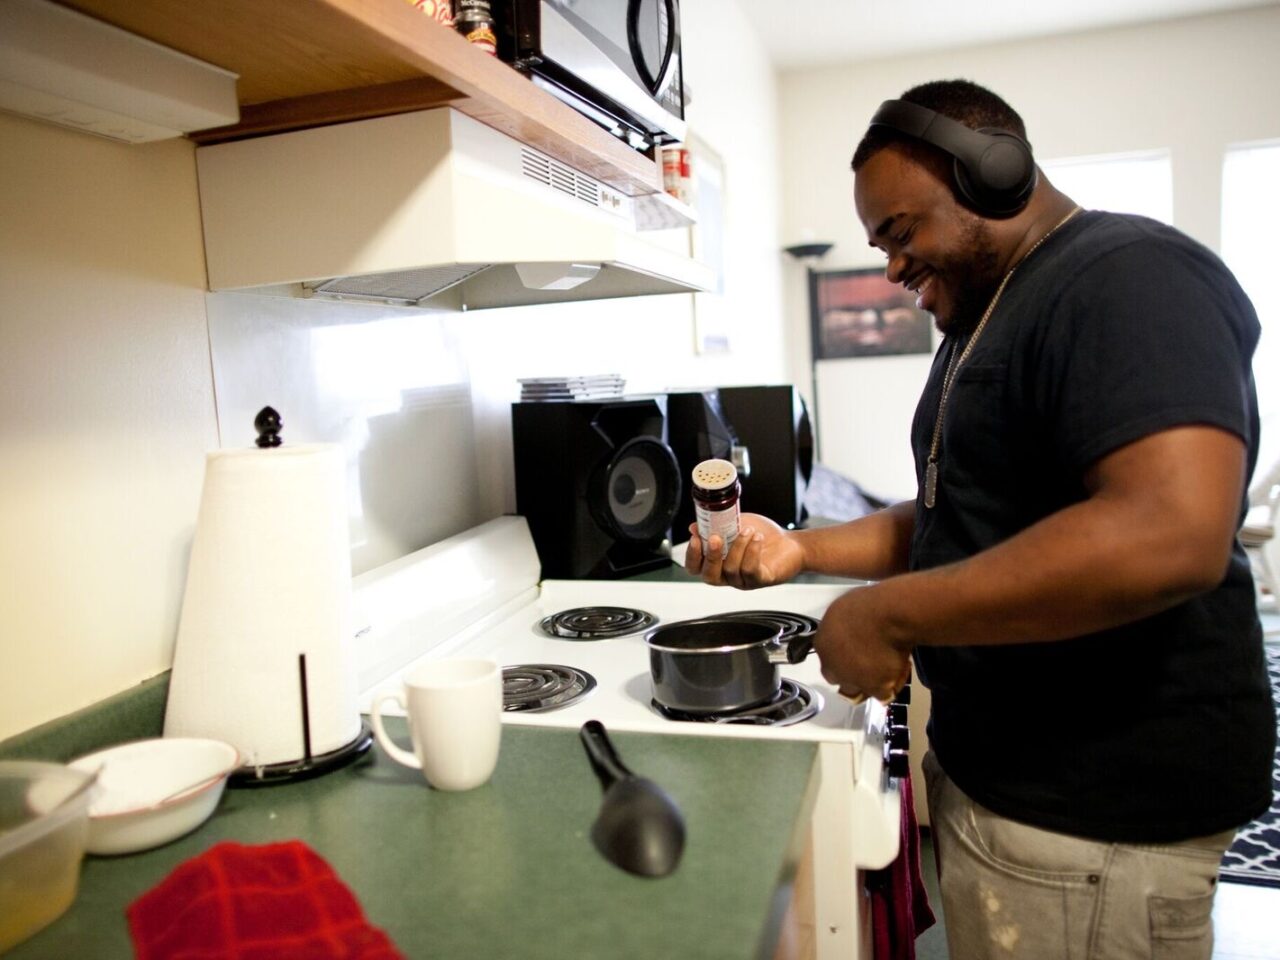 Smiling young adult wearing headphones cooking over a stove